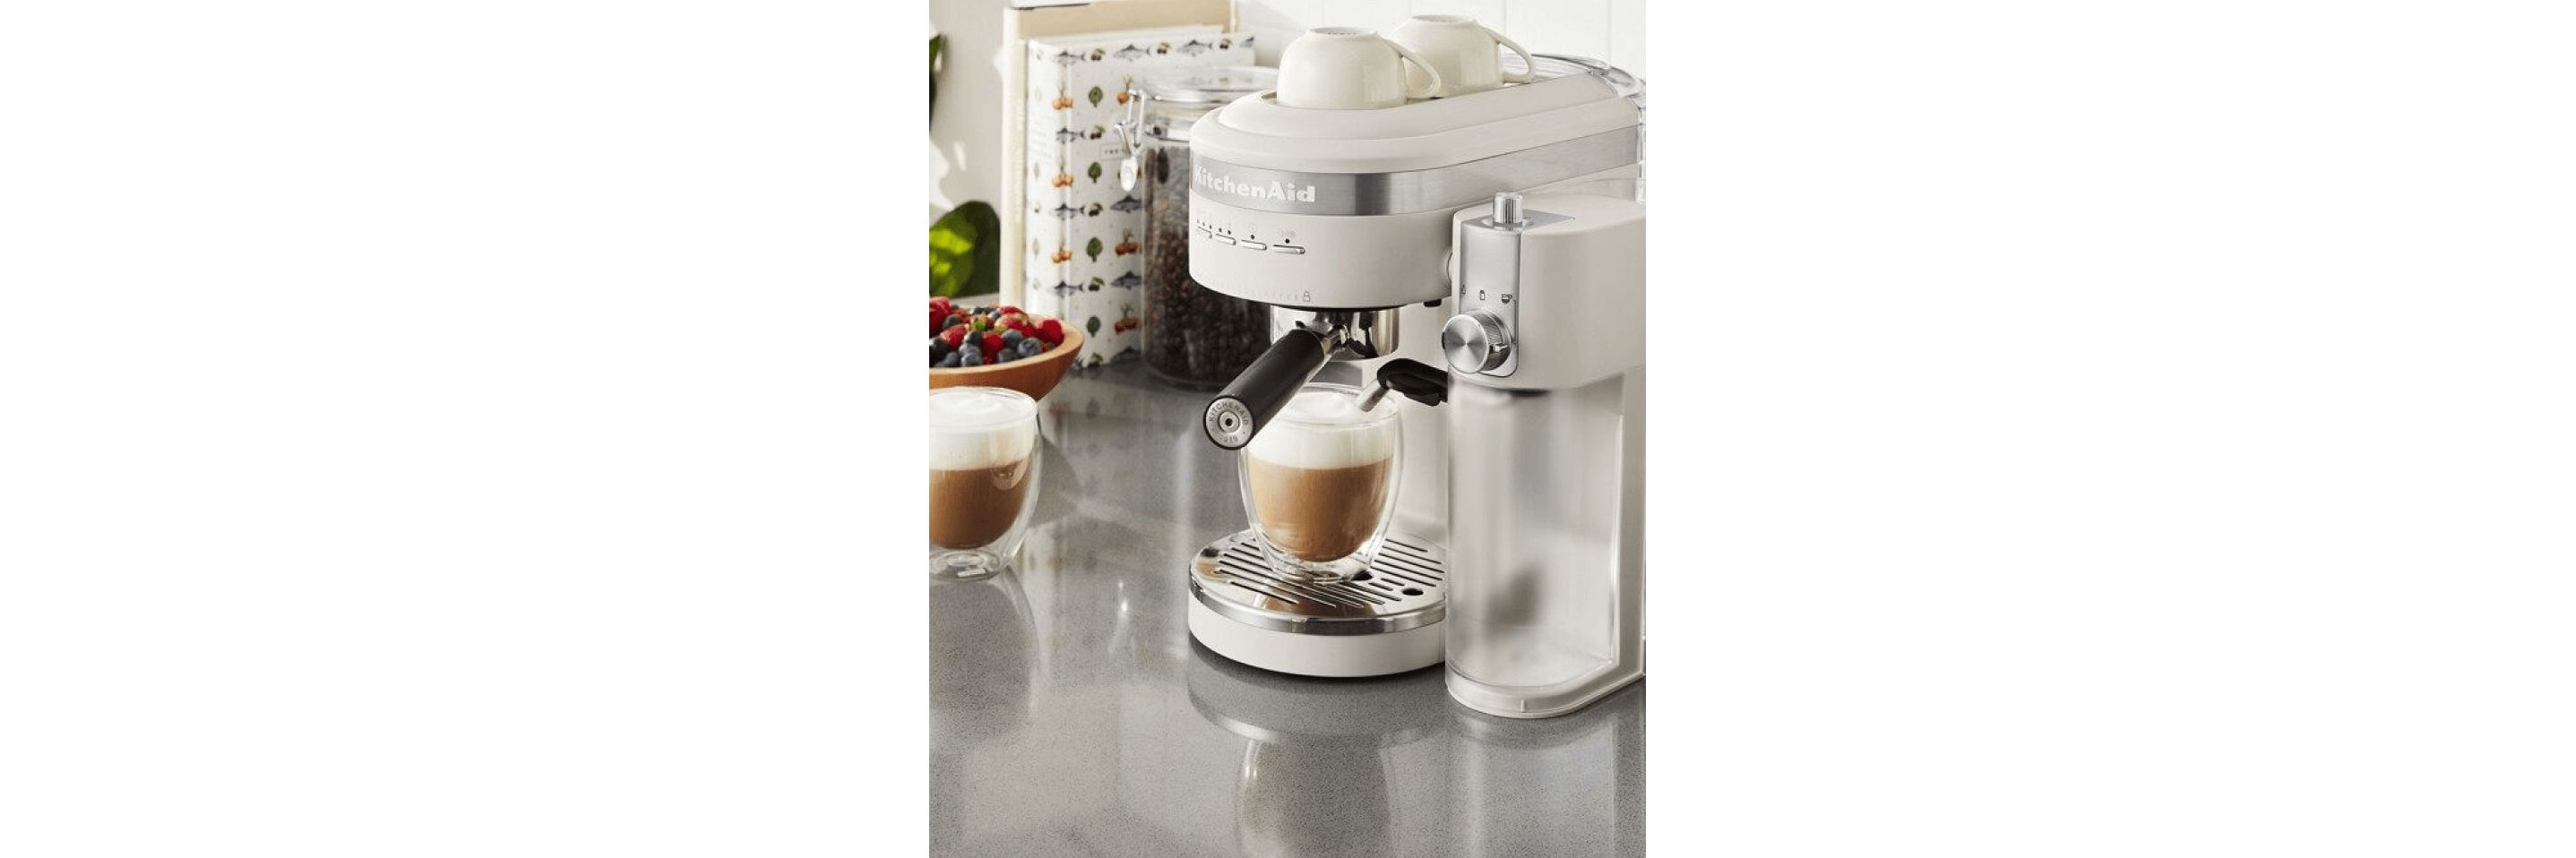 Inspiration to Kitchen | Bring Life Appliances Culinary to KitchenAid